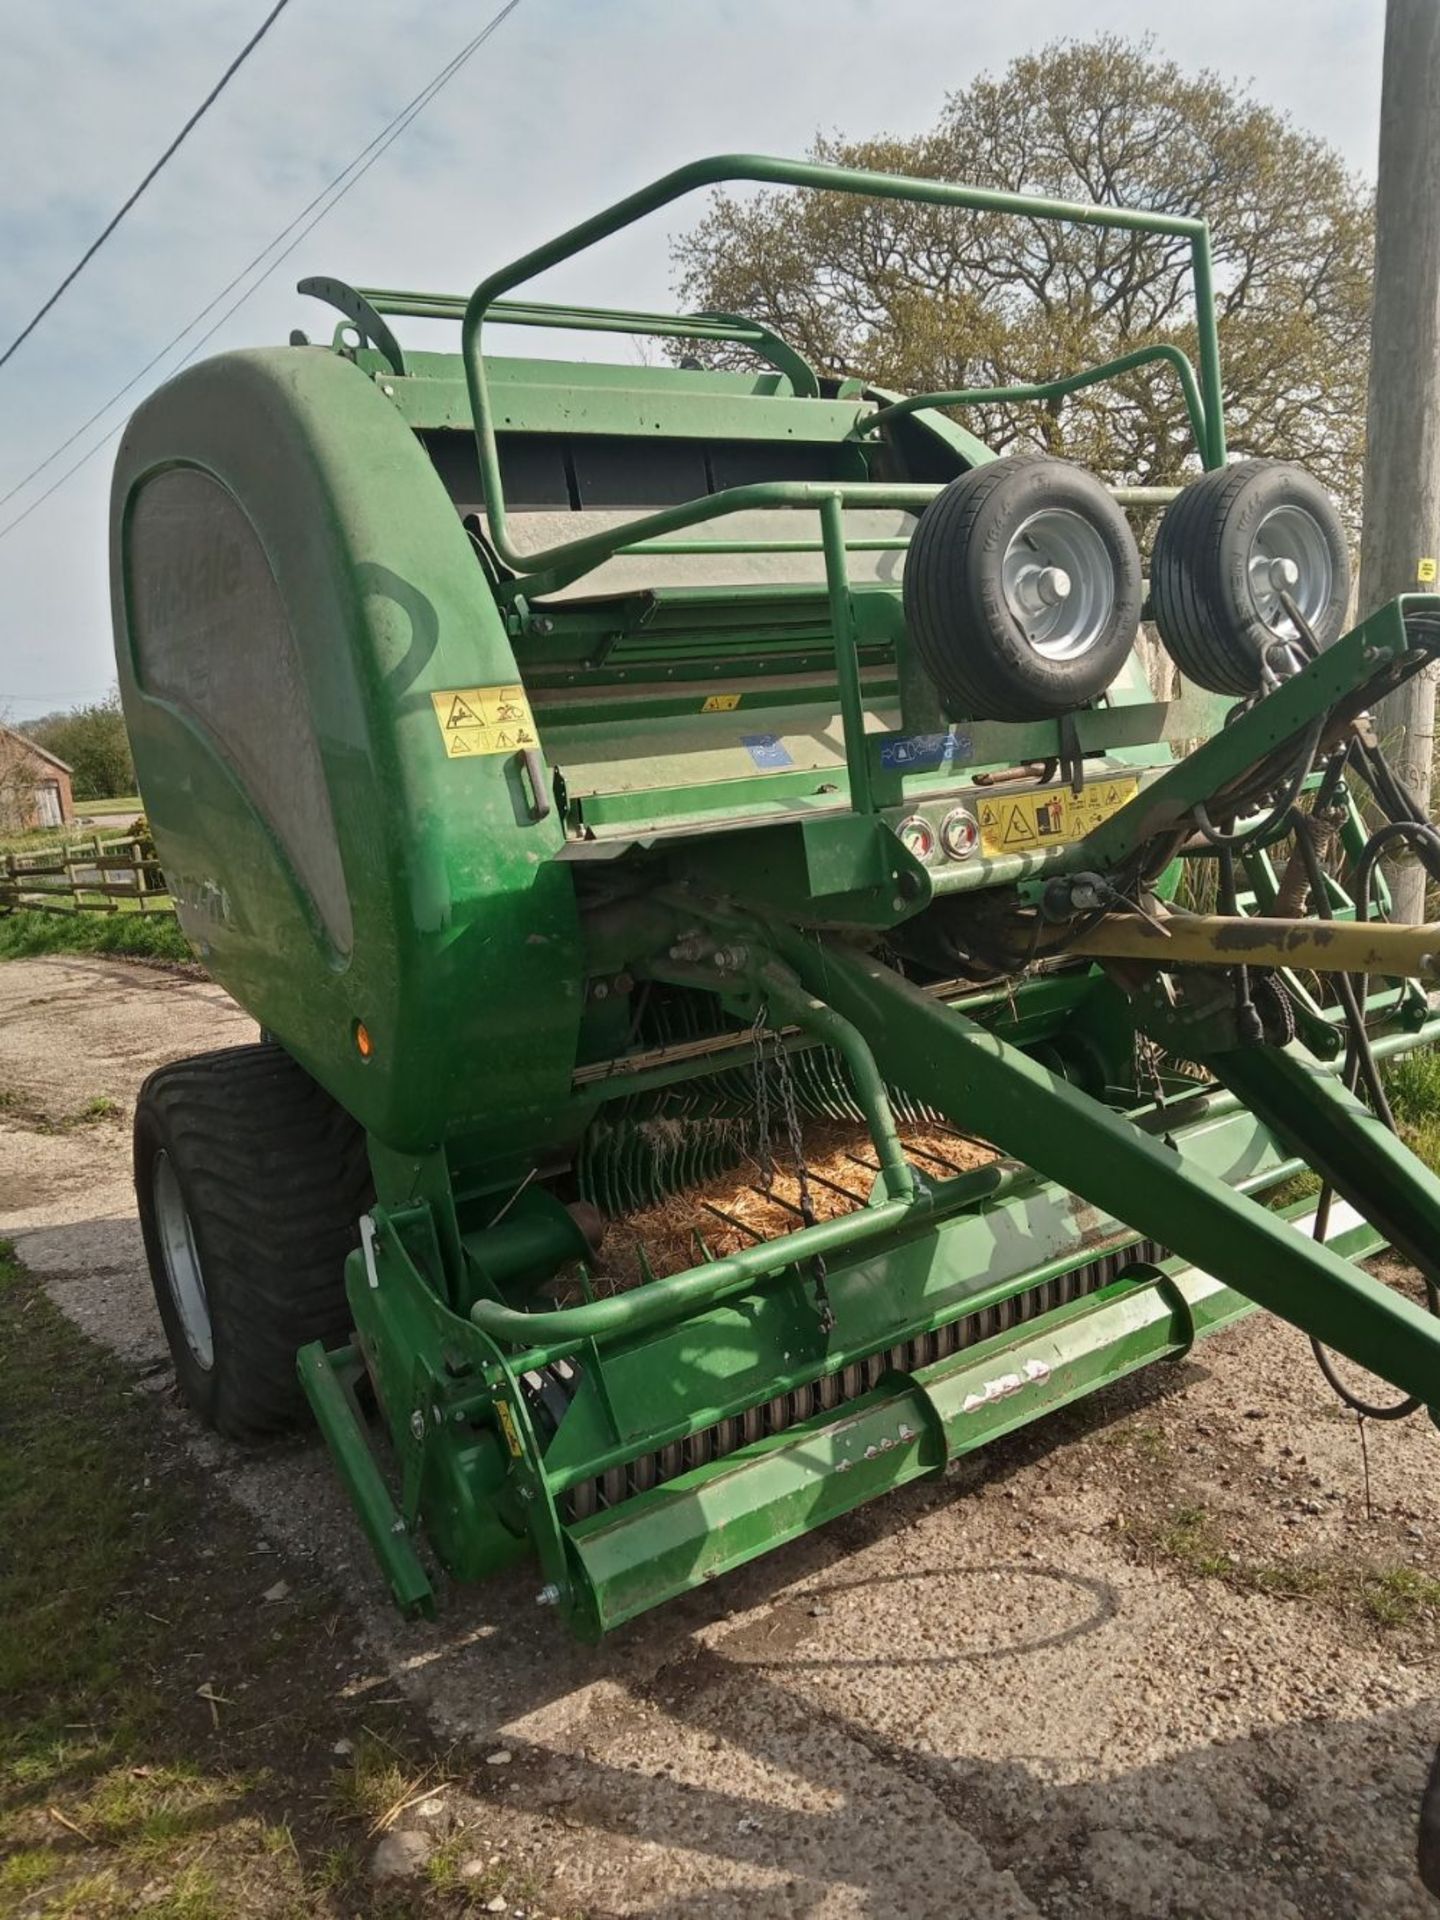 2018 McHale baler V660 with blades, very good condition, low bale count.